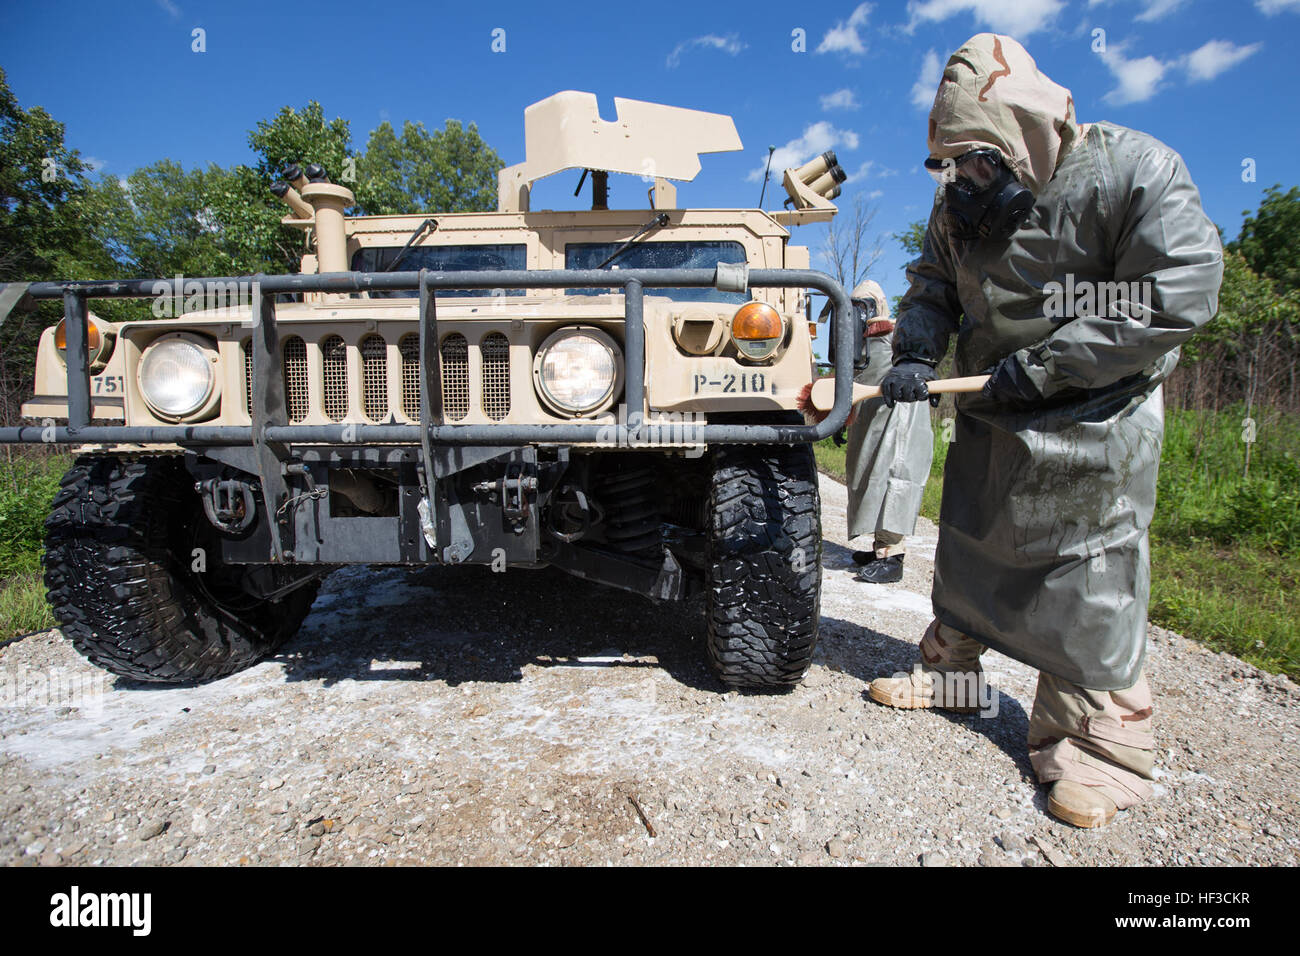 A soldier assigned to the 3175th Chemical Company, 835th Combat Sustainment Support Brigade scrubs a Humvee with cleaning agents during a detailed equipment decontamination during annual training on June 8, 2015 at Fort Leonard Wood, Mo. The soldiers wear MOPP level 4 gear and thoroughly clean and check the vehicles for hazardous chemical contaminants before clearing them for further use. (U.S. Army photo by Pfc. Samantha J. Whitehead) Missouri Guard Chemical Company trains to keep troops, equipment safe 150608-Z-YF431-153 Stock Photo